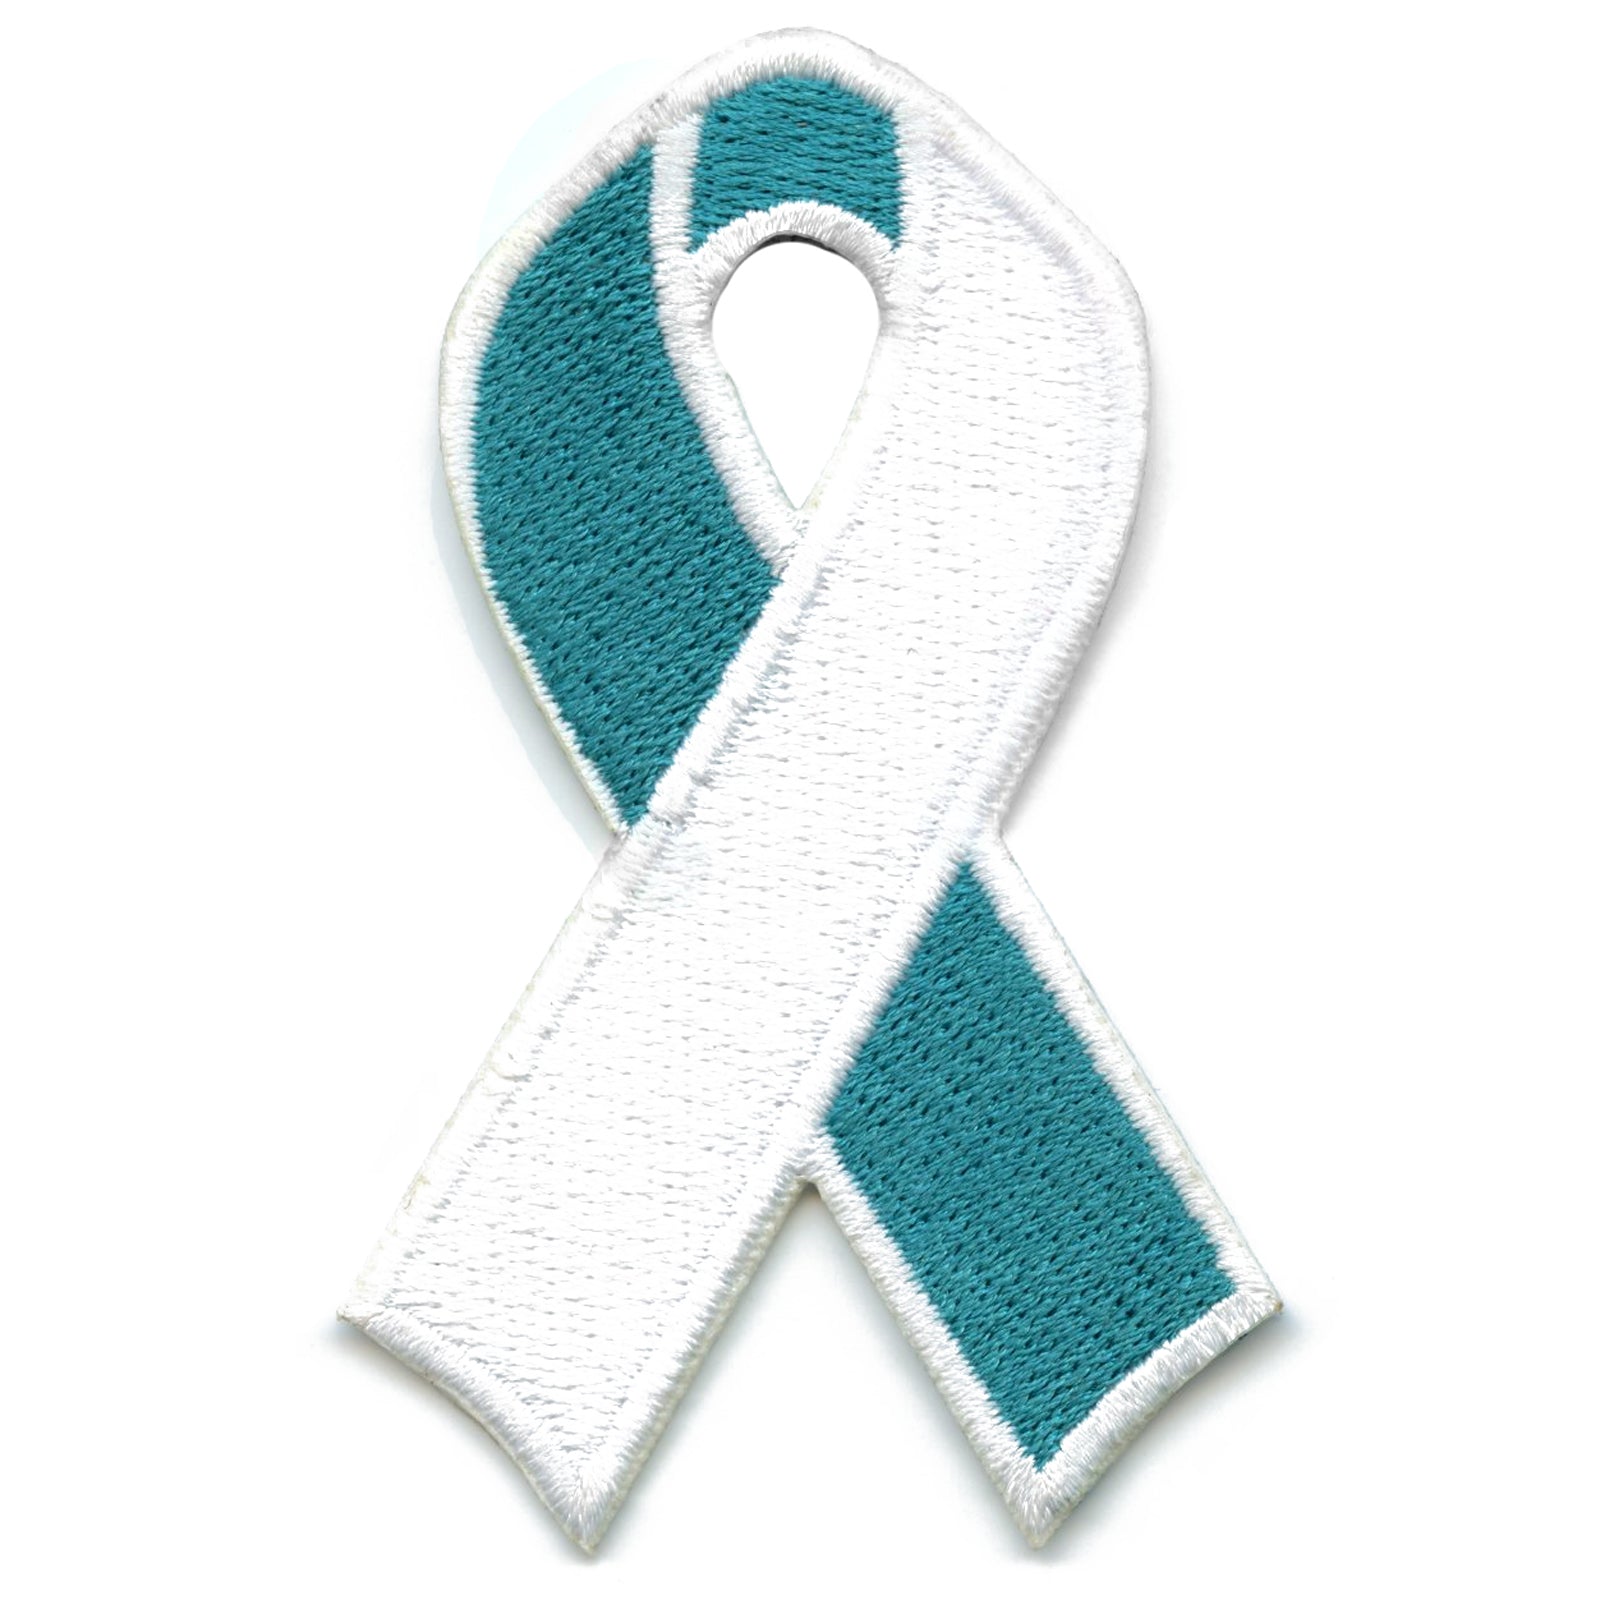 Blue awareness ribbon with trail on white background, Dark blue